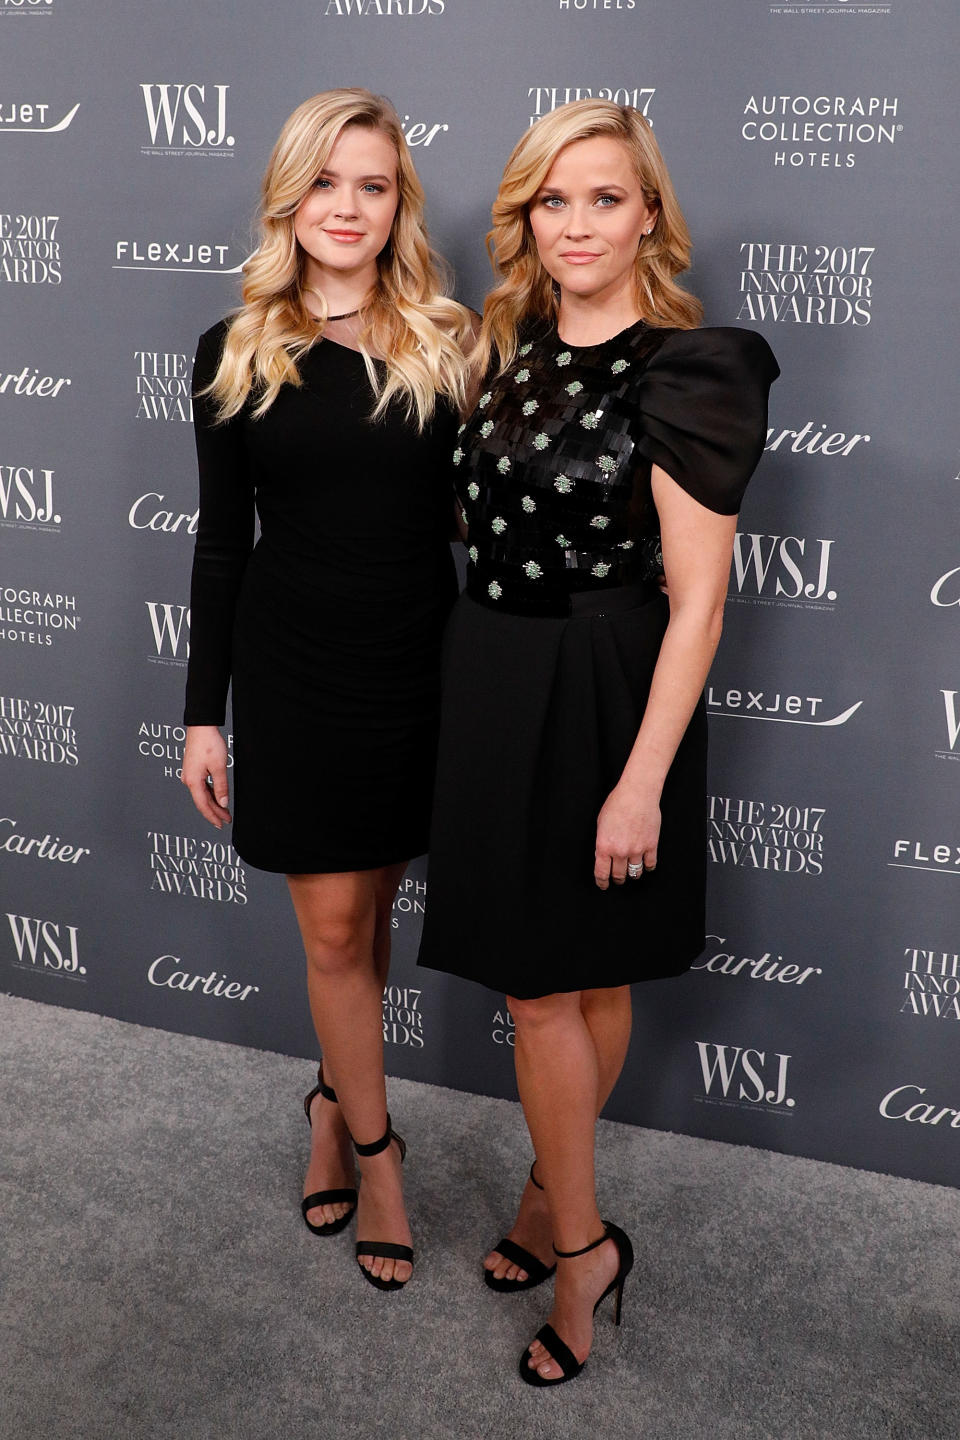 <p>These two looked more like sister-sister than mother-daughter while attending <em>WSJ Magazine</em>’s 2017 Innovator Awards in New York City. Ava and Reese both wore black dresses — Balmain and Giorgio Armani, respectively — and struck similar poses on the red carpet. Reese’s 18-year-old mini-me even has her closed-mouth smile down pat. (Photo: Getty Images) </p>